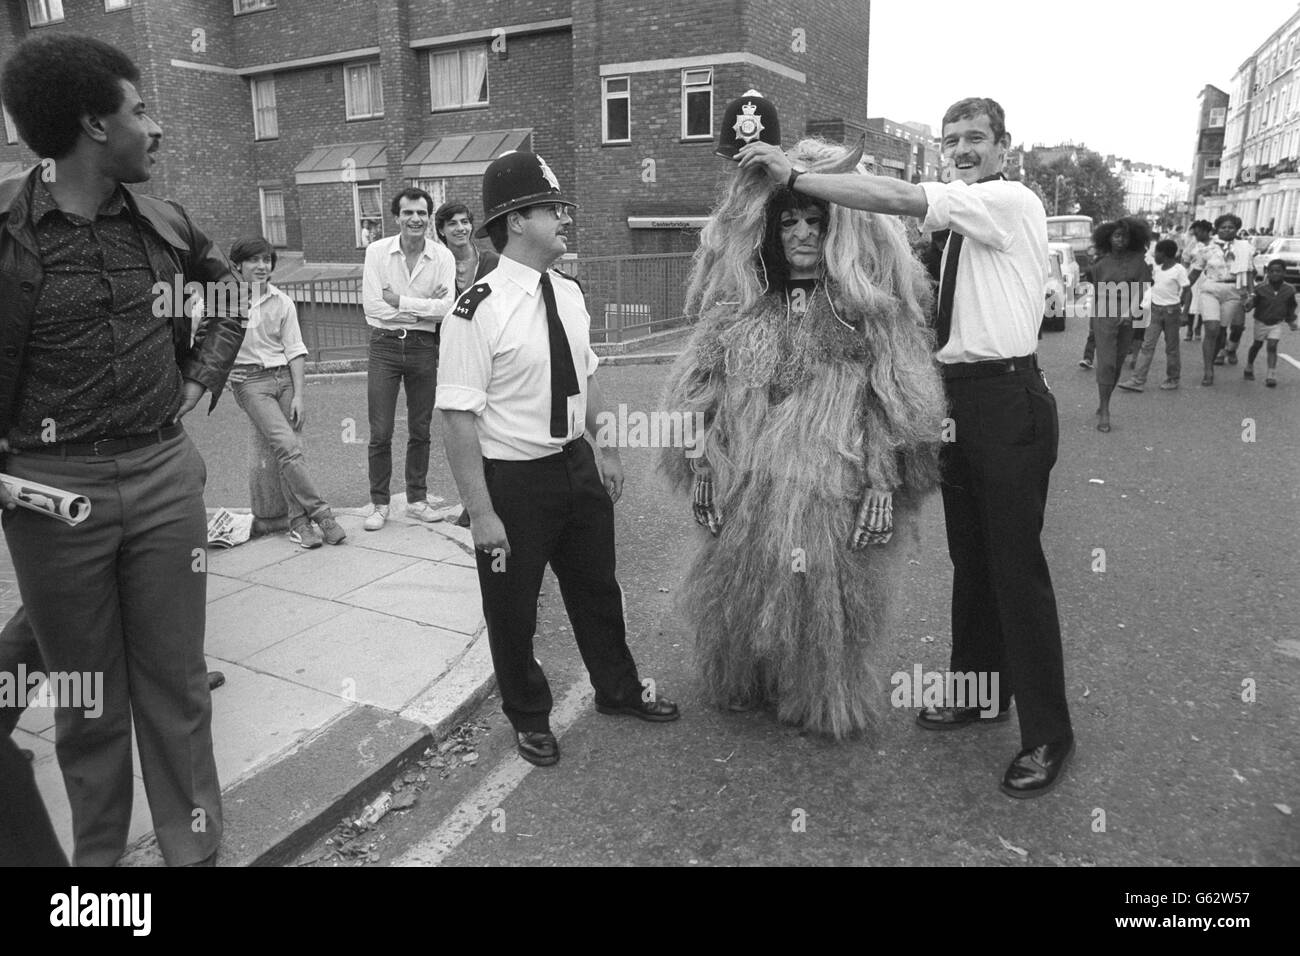 A Notting Hill Carnival witch doctor gets magical aid in the shape of a policeman's helmet during today's peaceful festivities. Stock Photo